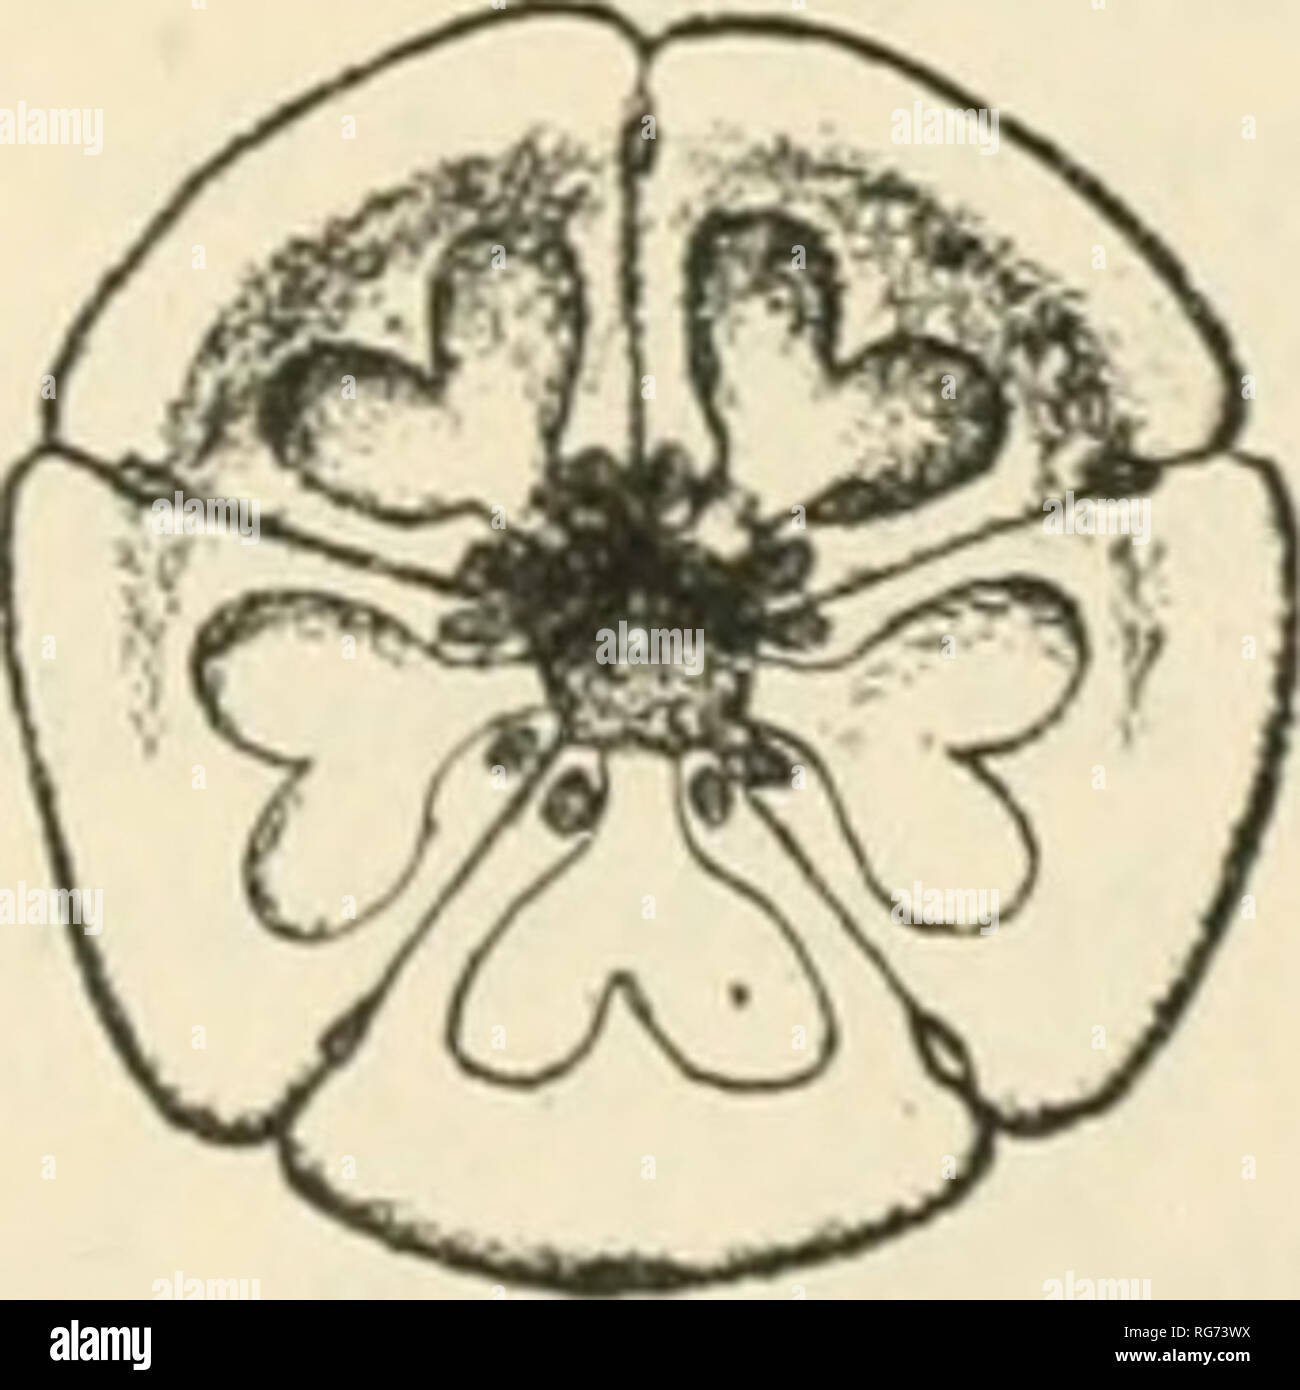 . Bulletin - United States National Museum. Science. Fig. 470. Fig. 4i.i;i. ISL..NBS. 466, DORSAL VIEW OF THE RADUL 'â '=''TAaON OF A SI EOMFN &quot;^ .URTUVUBI FROM SOUTmTESIERU ISLANDS. 467, DORSAL ^^EW OF THE RADIAL ^^^'^'^^l^YJ.cZToTzlZ^&quot;^ ^Â«OM SINGAPORE. 469, DOK- JAPAN. 46S, DORSAL VIEW OF THE RADIAL PENTAGON OF ^^^/â¢^^^^^â'â¢,&quot; ^ROM SINGAPORE. 470. DORSAL &gt;-,EW SAL ^lEW OF THE RADIAL -^^^ ^ ^-g^^^^.^VJ^fj:^^^&quot;.^^^^^ THE PHOIPPINE ISLANDS (AFTER P. H. OF THE RADIAL PENTAGON OF A SPECIMEN OF BETEROMtTKA MKjI^u^r^ Carpenter).. Please note that these images are extracte Stock Photo